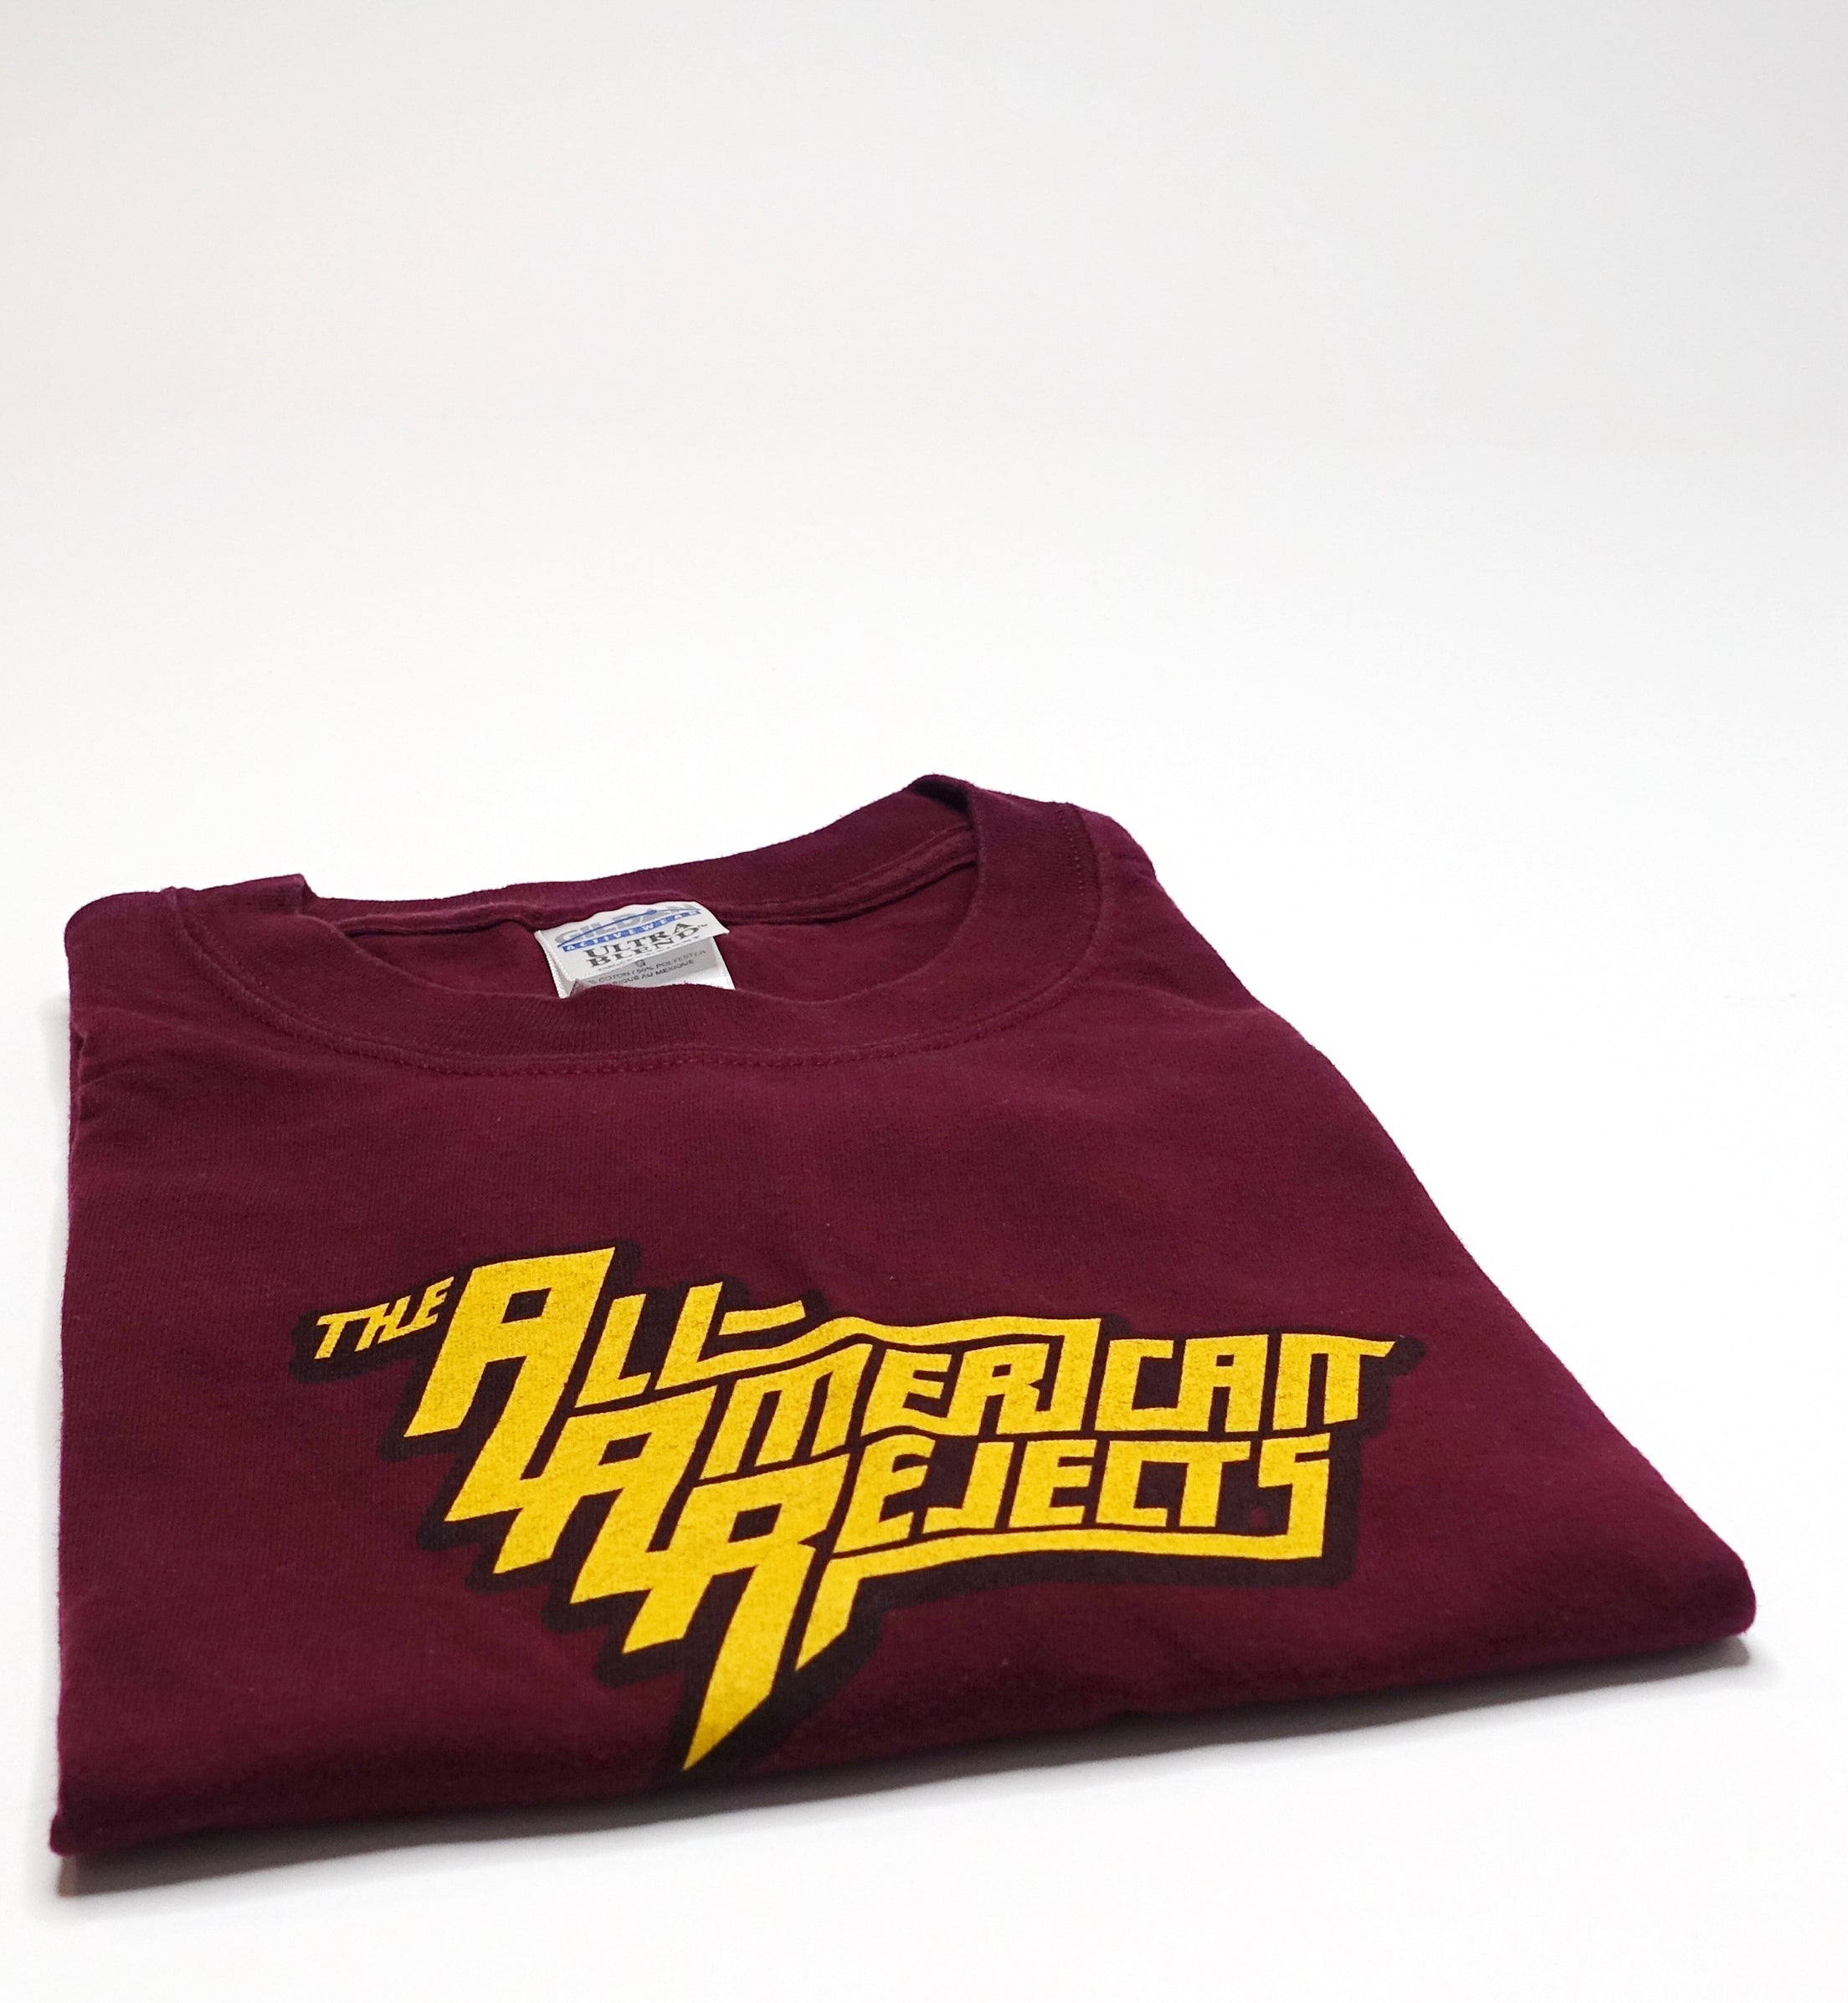 the All American Rejects - S/T 2002 Tour Shirt Size Large